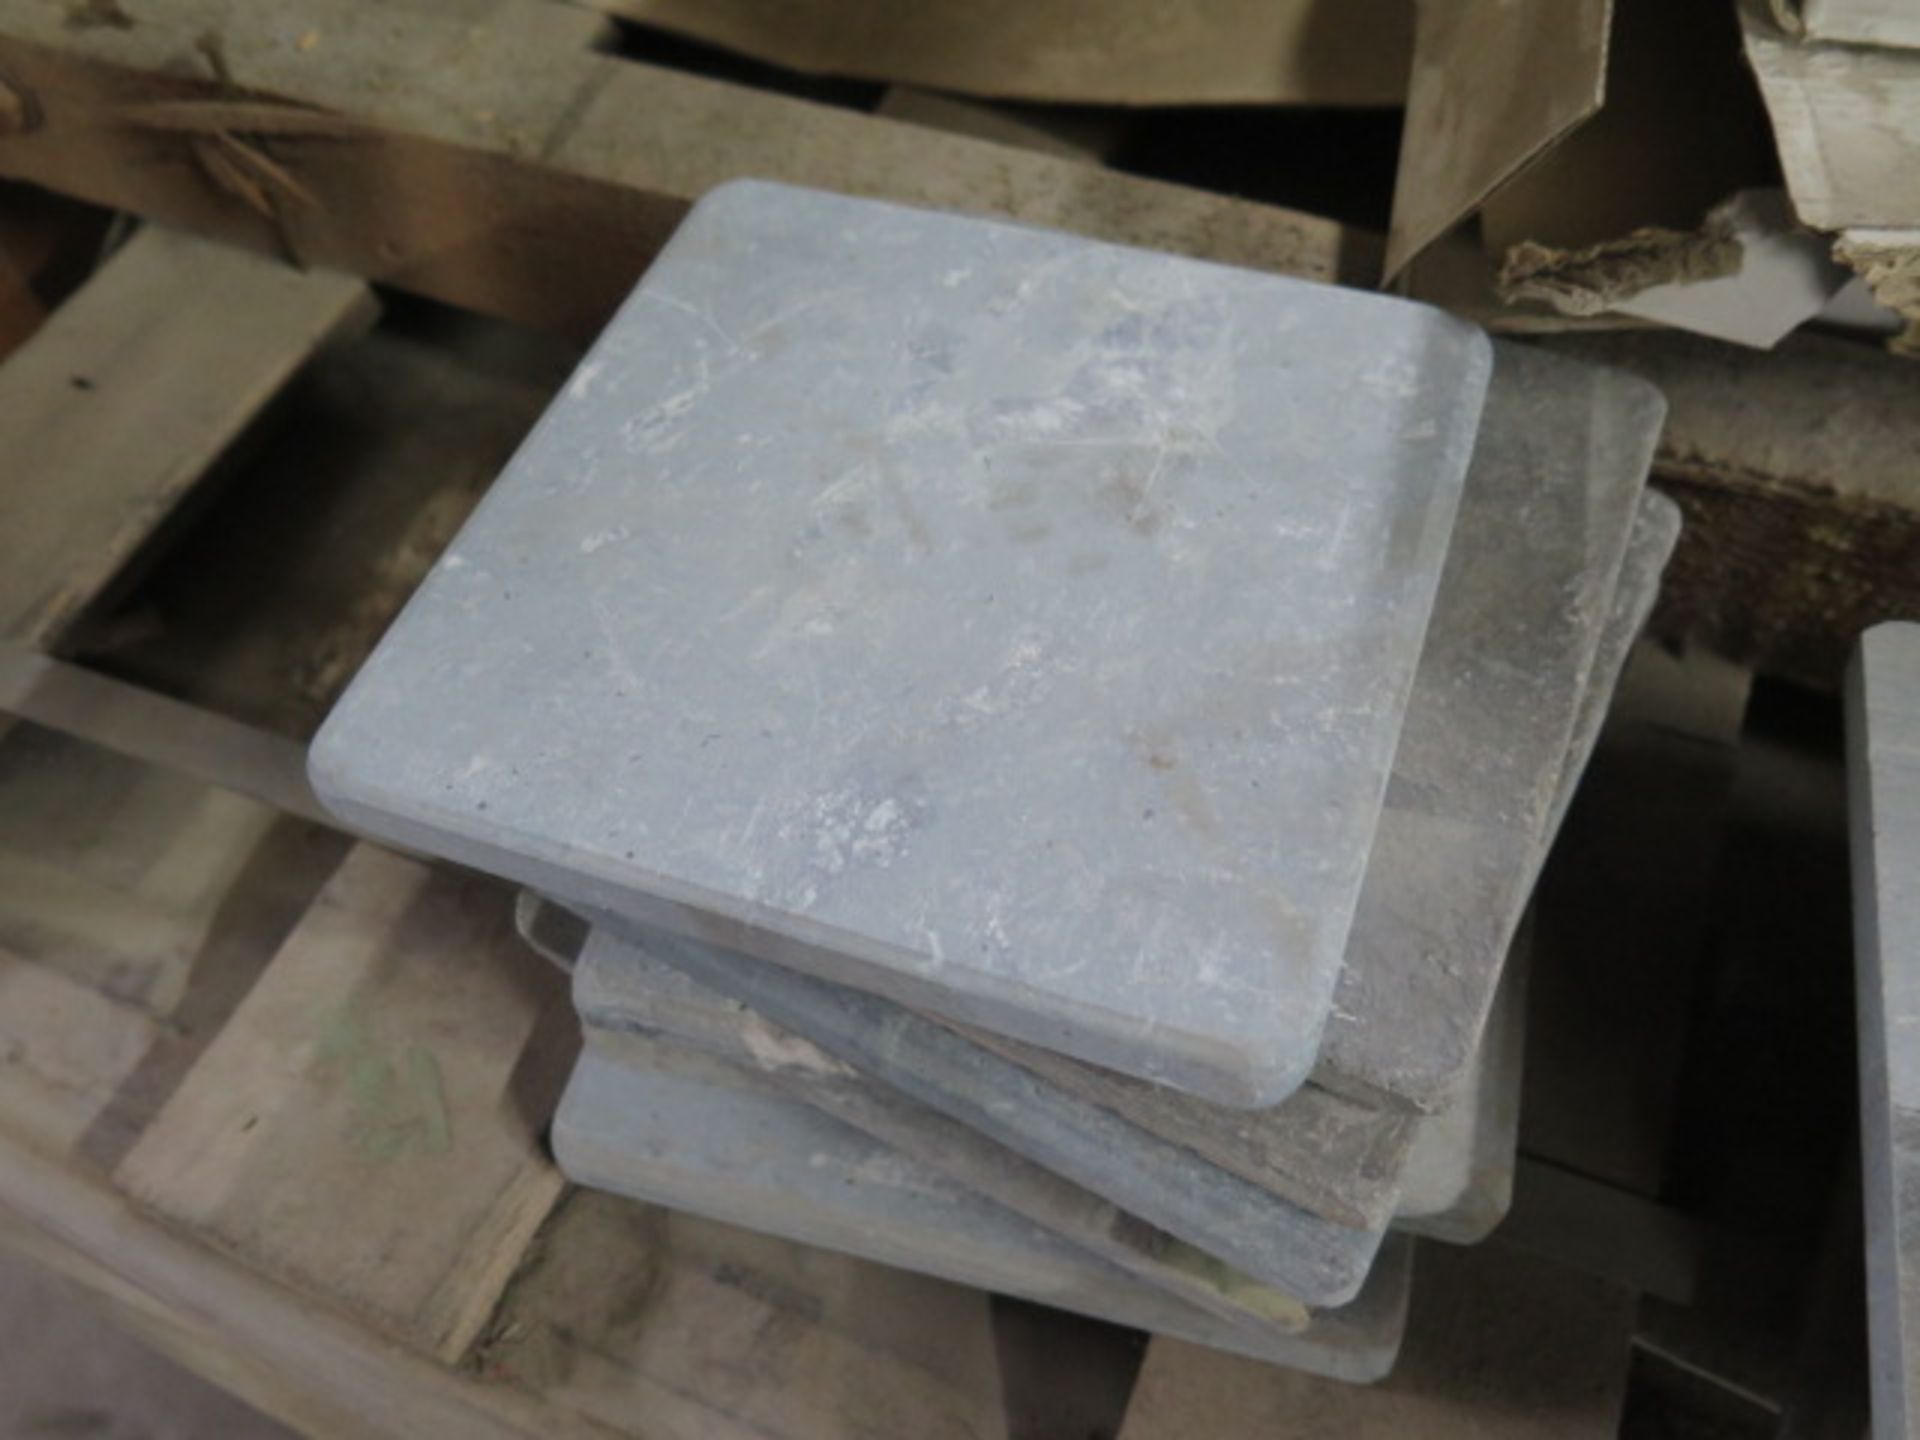 Hulian Jade Marble 6" x 6" Antique Tiles (3 Pallets) (SOLD AS-IS - NO WARRANTY) - Image 9 of 9